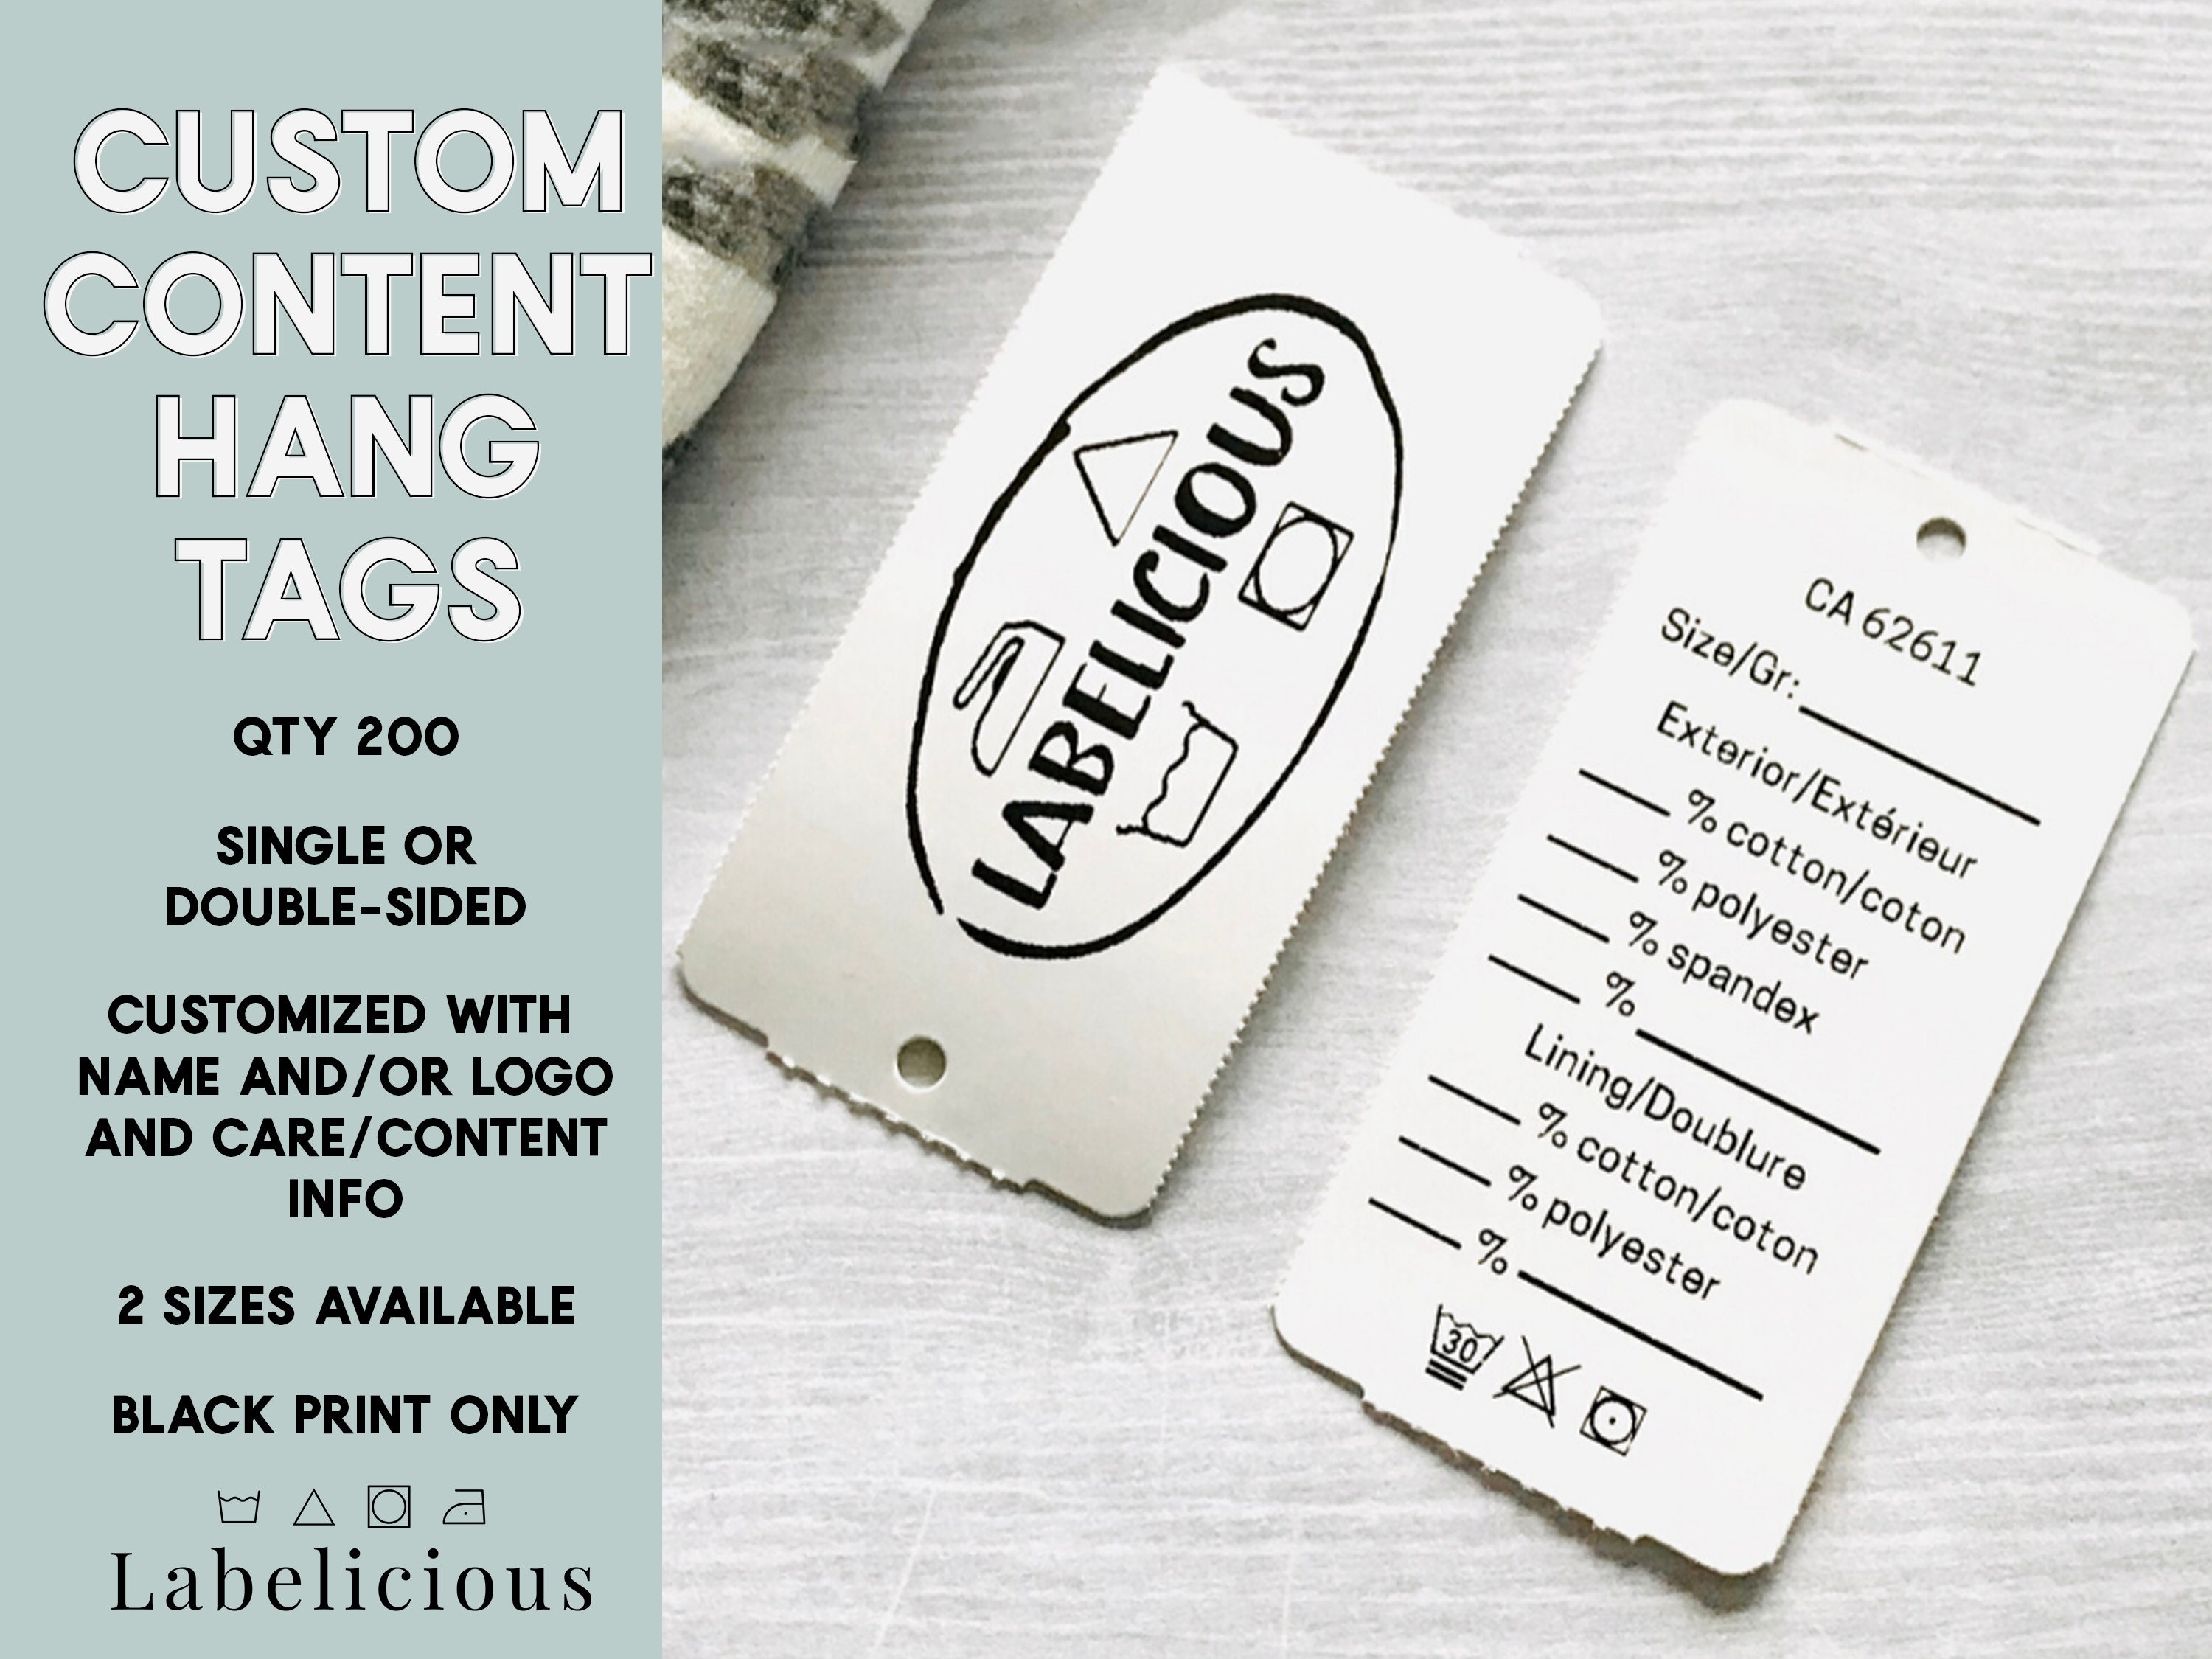 Stamp for Garment Tags With Fiber Content and Care 